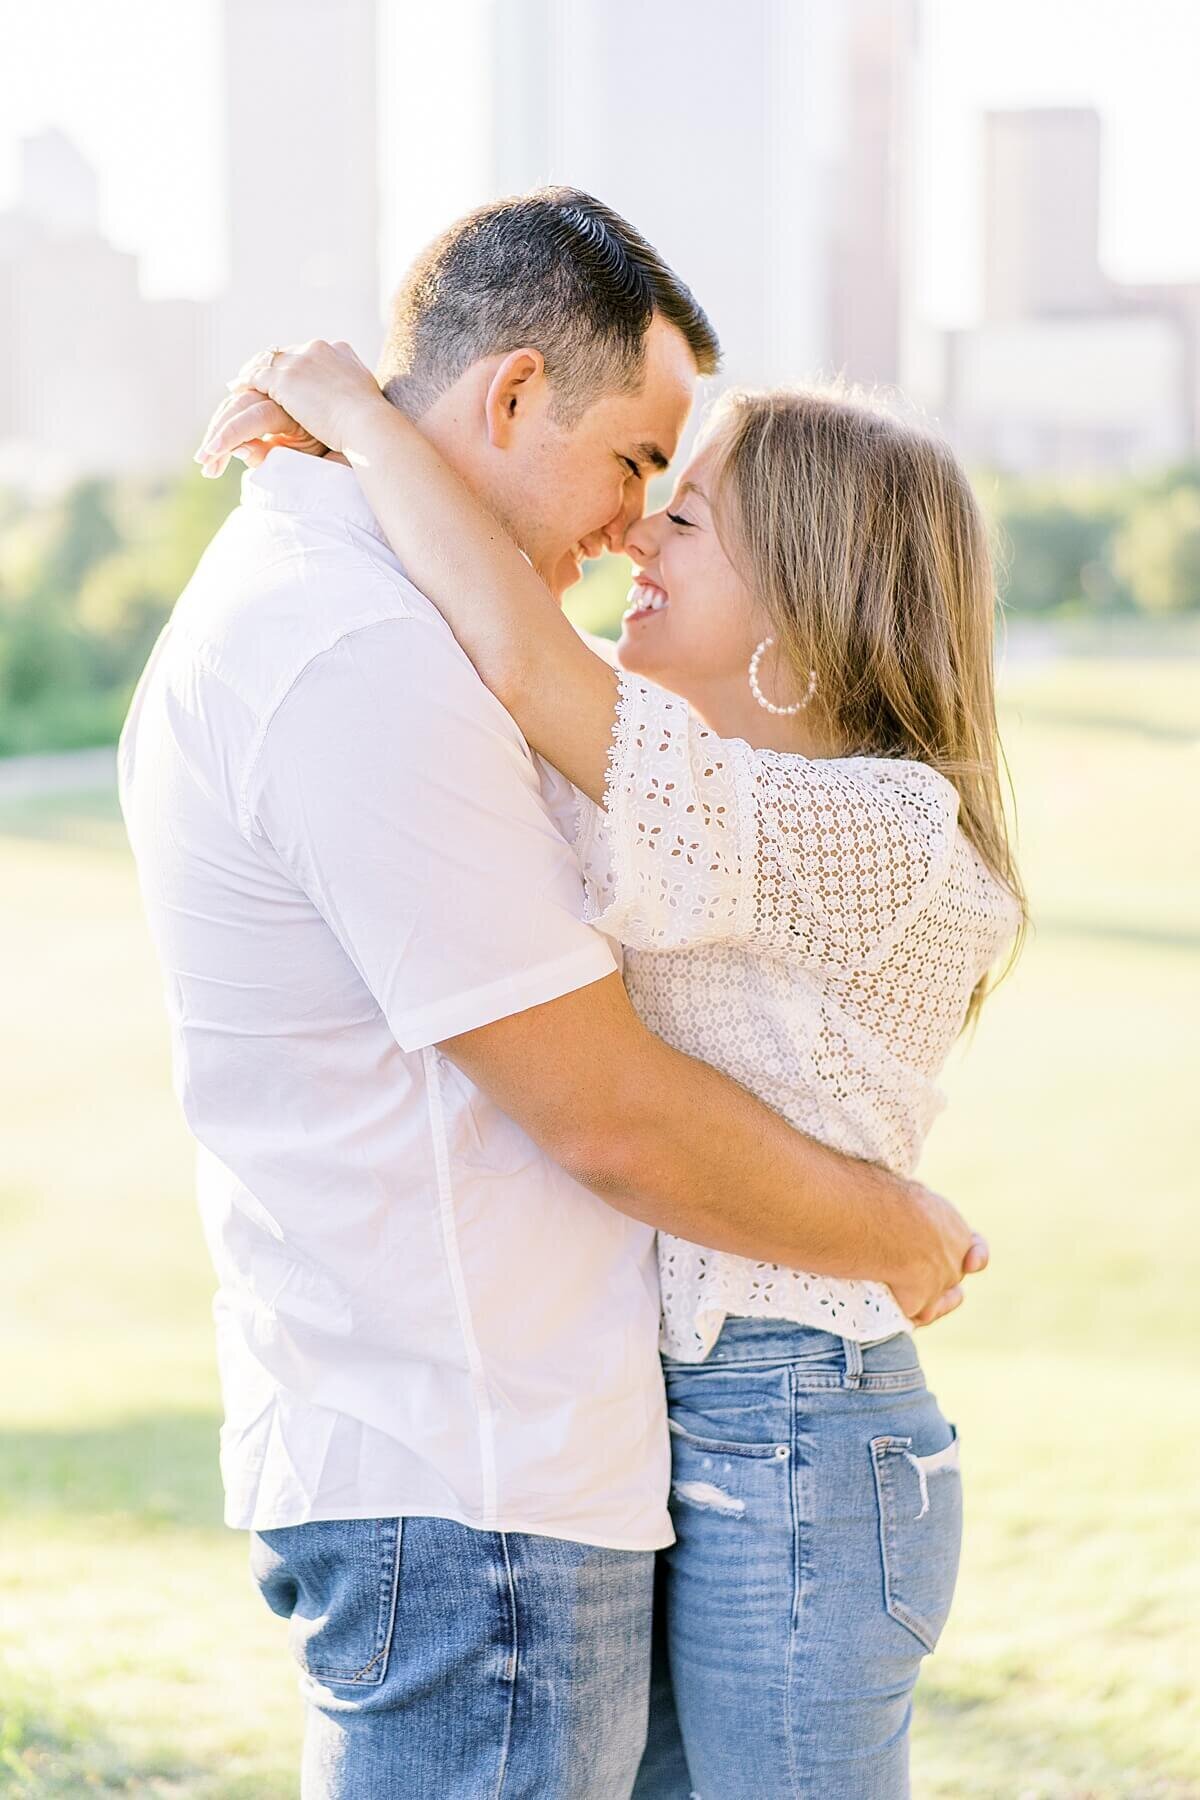 McGovern-Centennial-Gardens-Hermann-Park-Engagement-Session-Alicia-Yarrish-Photography_0041